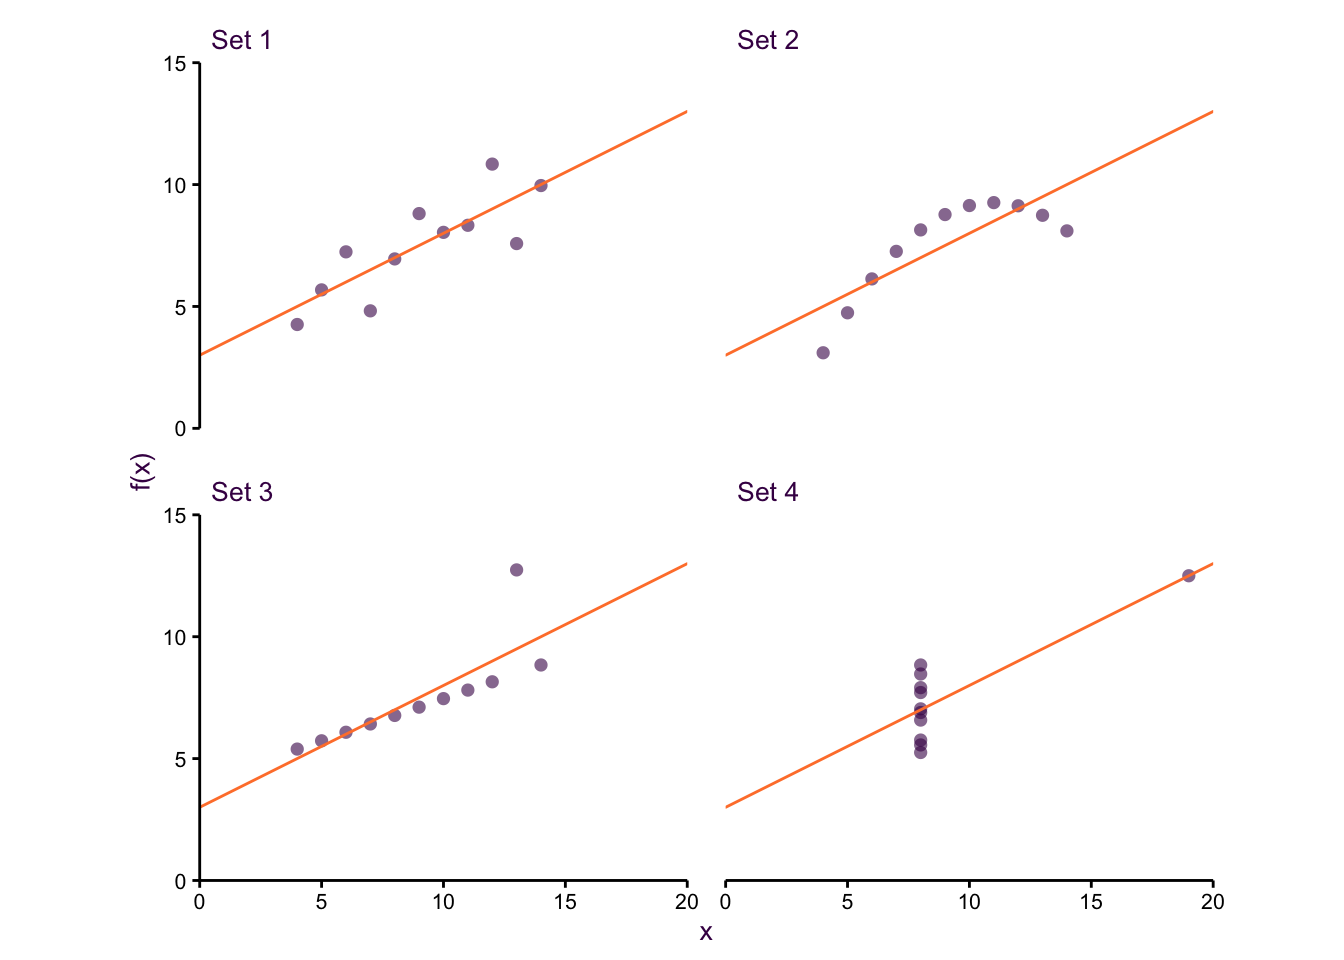 Anscombe's plots. Although their distributions are distinct, each data set is described by the same linear model and correlation coefficient. Relying on numerical analysis alone does not tell the complete story.